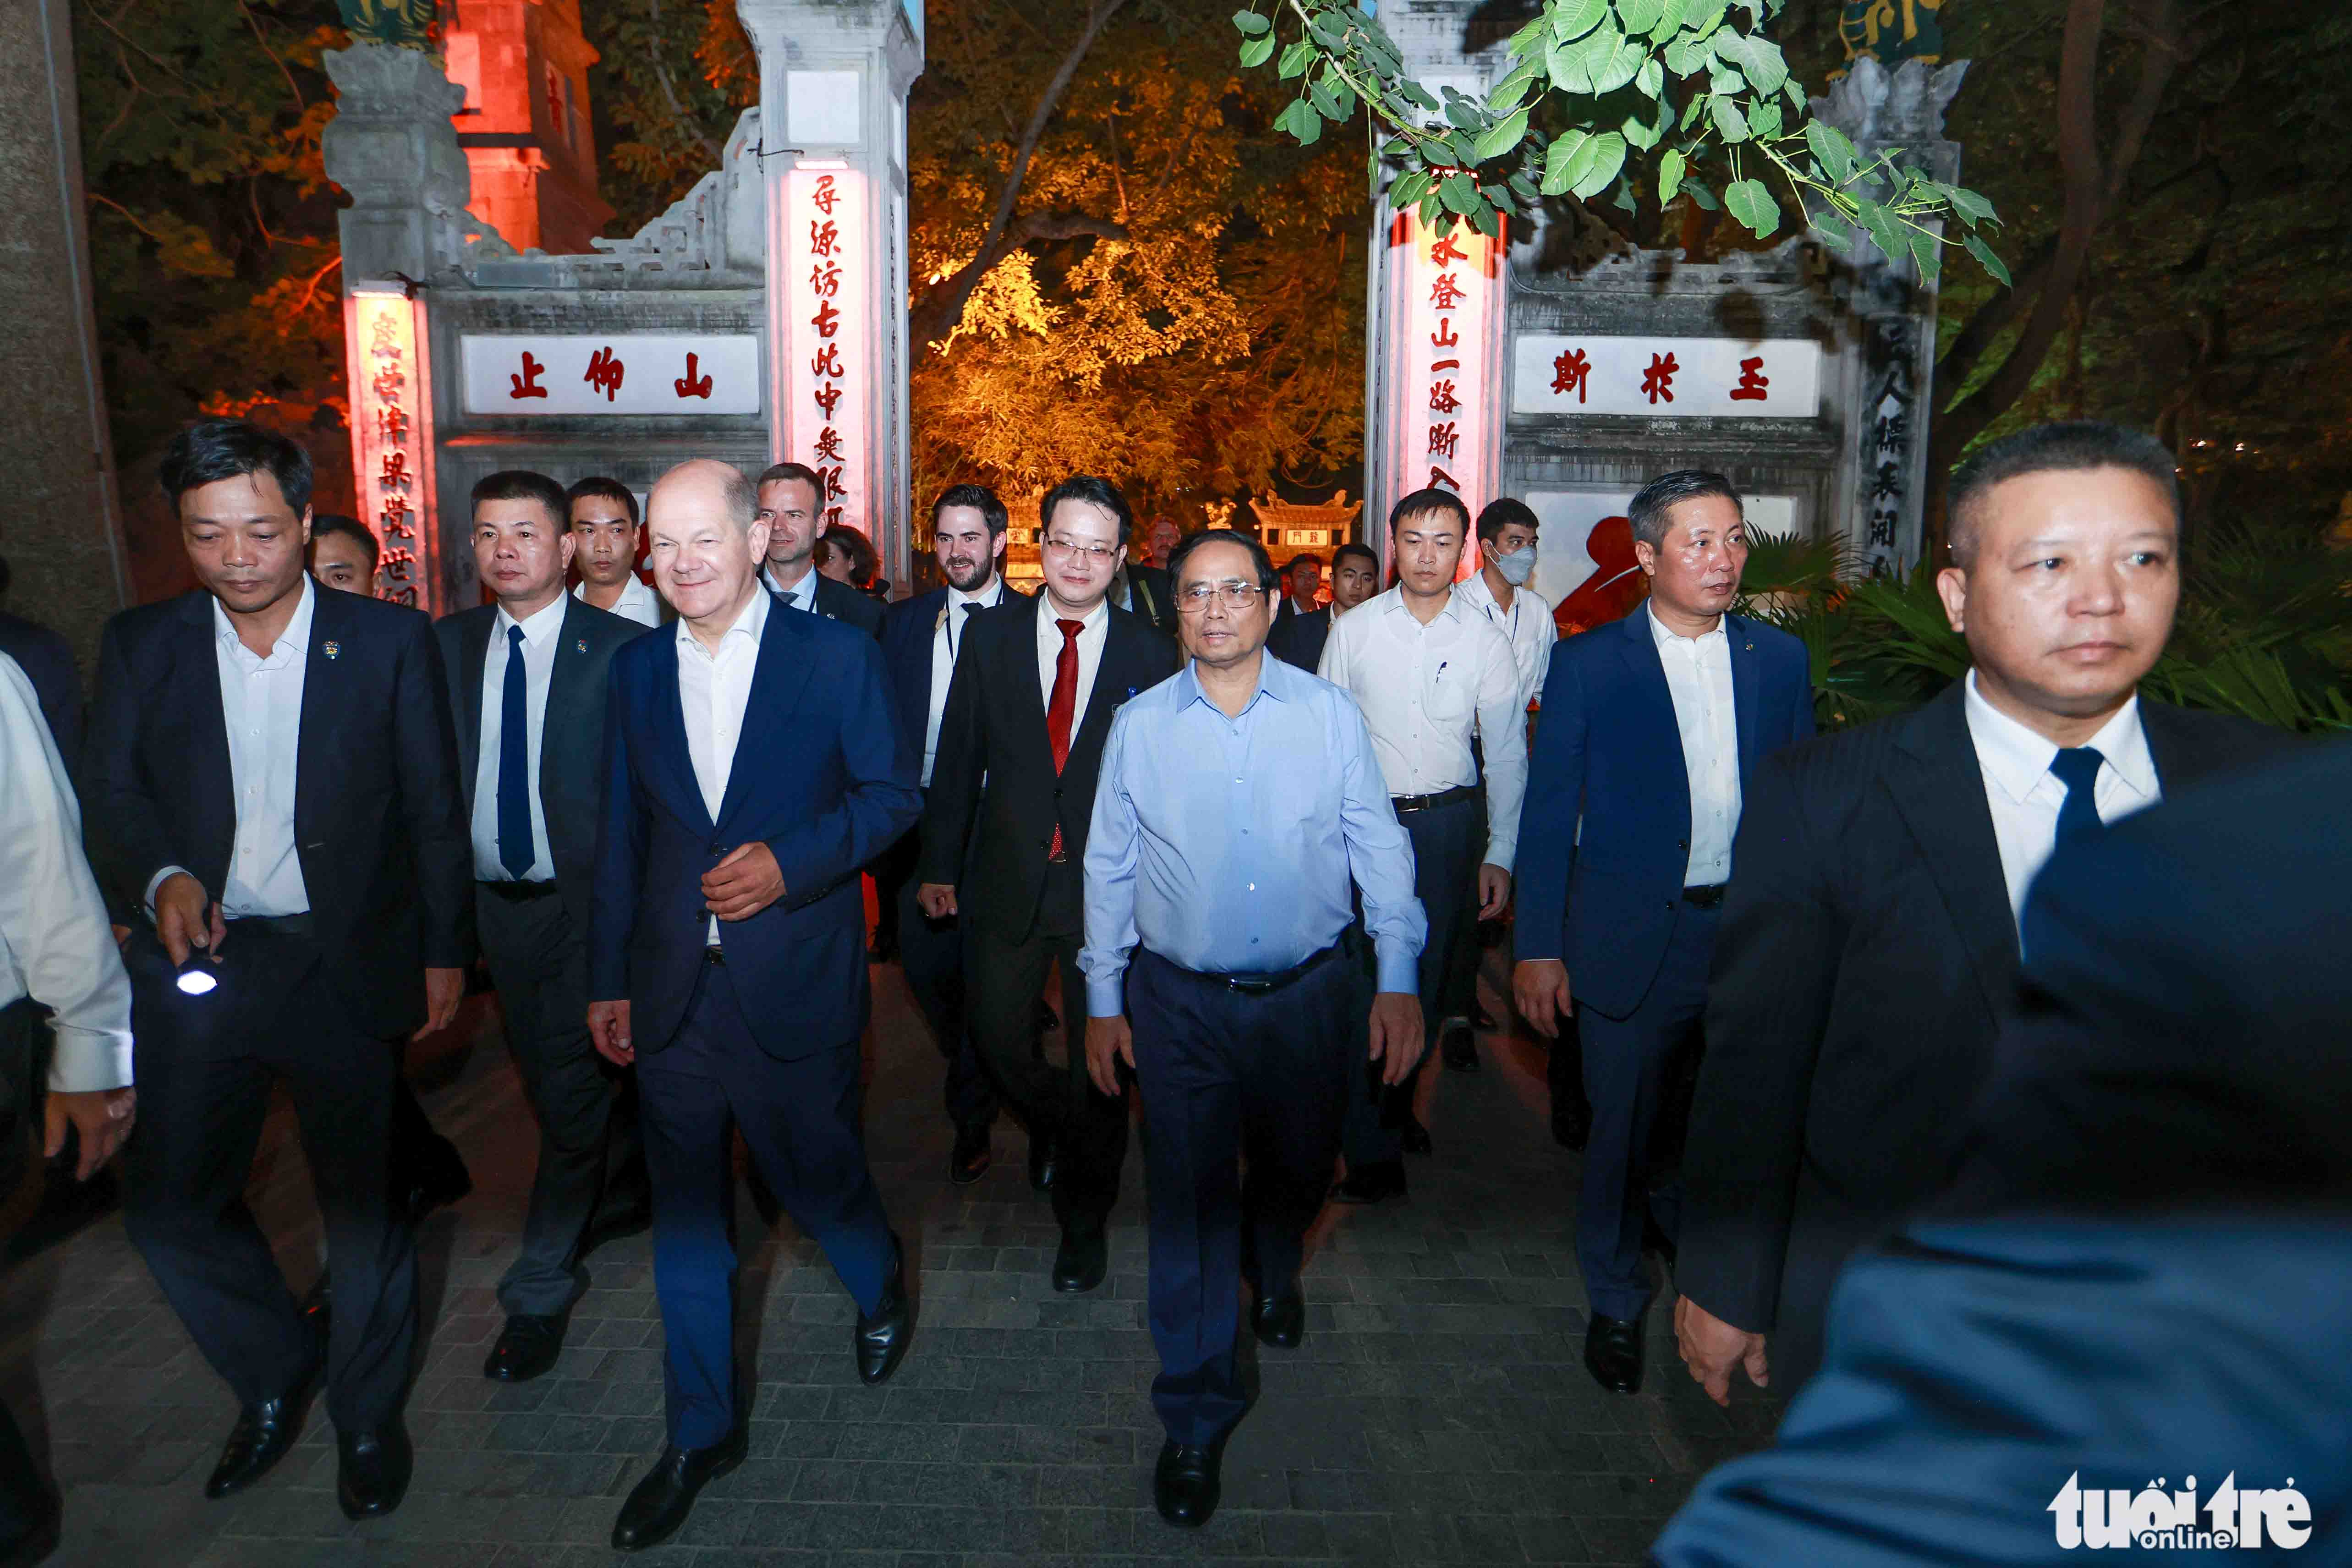 Prime Minister Pham Minh Chinh and Chancellor Olaf Scholz exit Ngoc Son Temple in Hanoi, November 13, 2022. Photo: Nguyen Khanh / Tuoi Tre